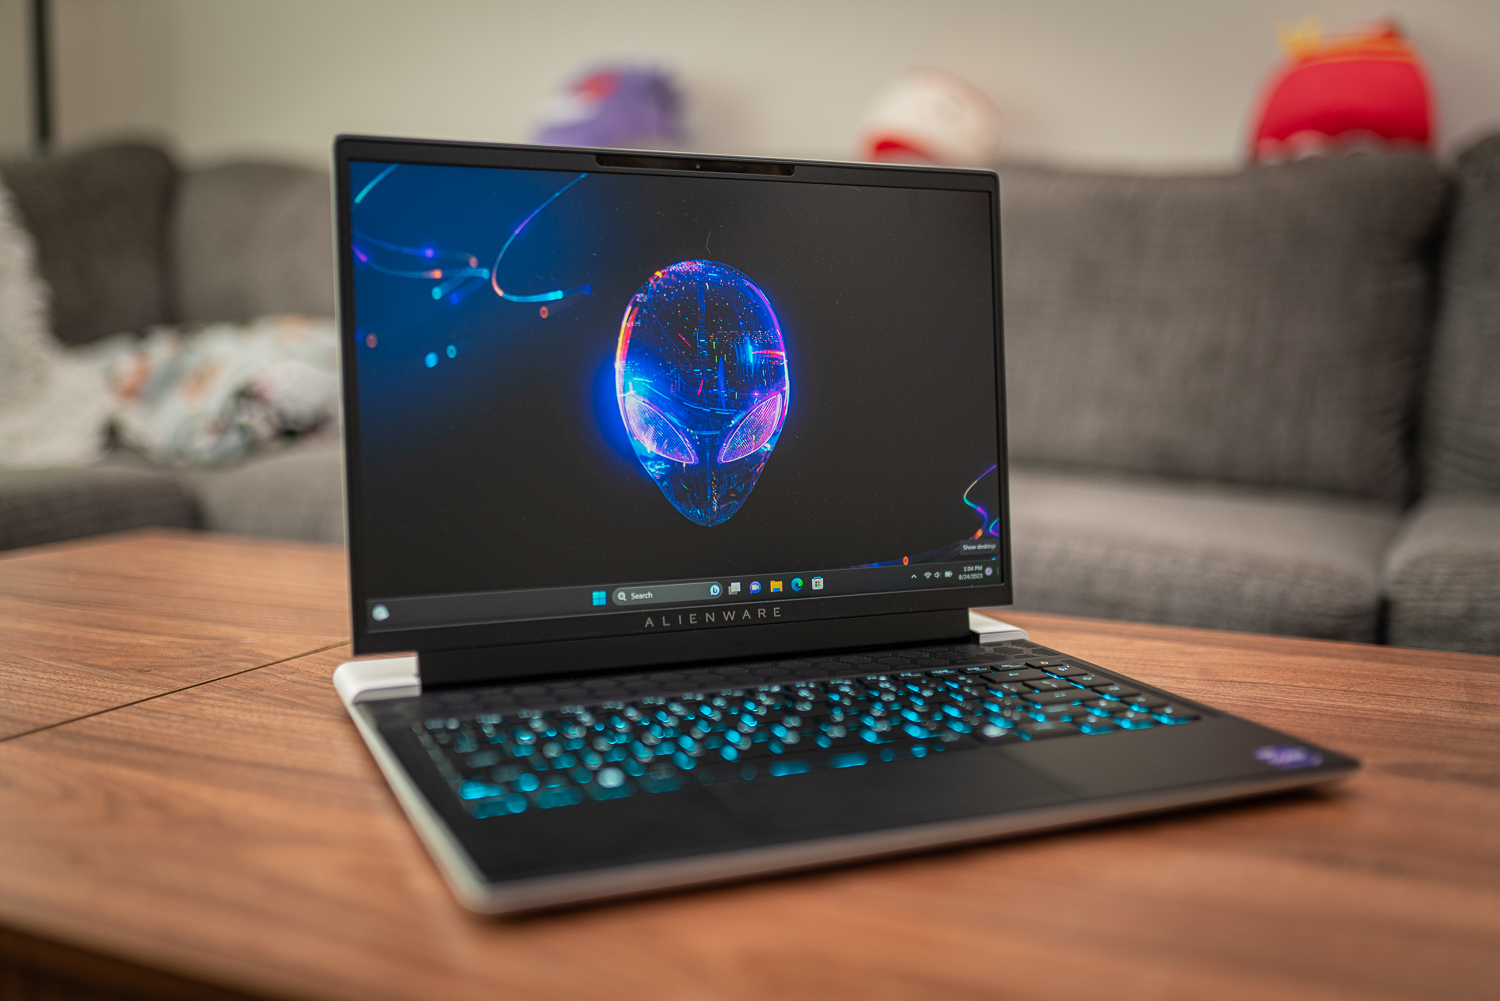 Alienware x14 R2 is a compact gaming laptop with Raptor Lake-H and